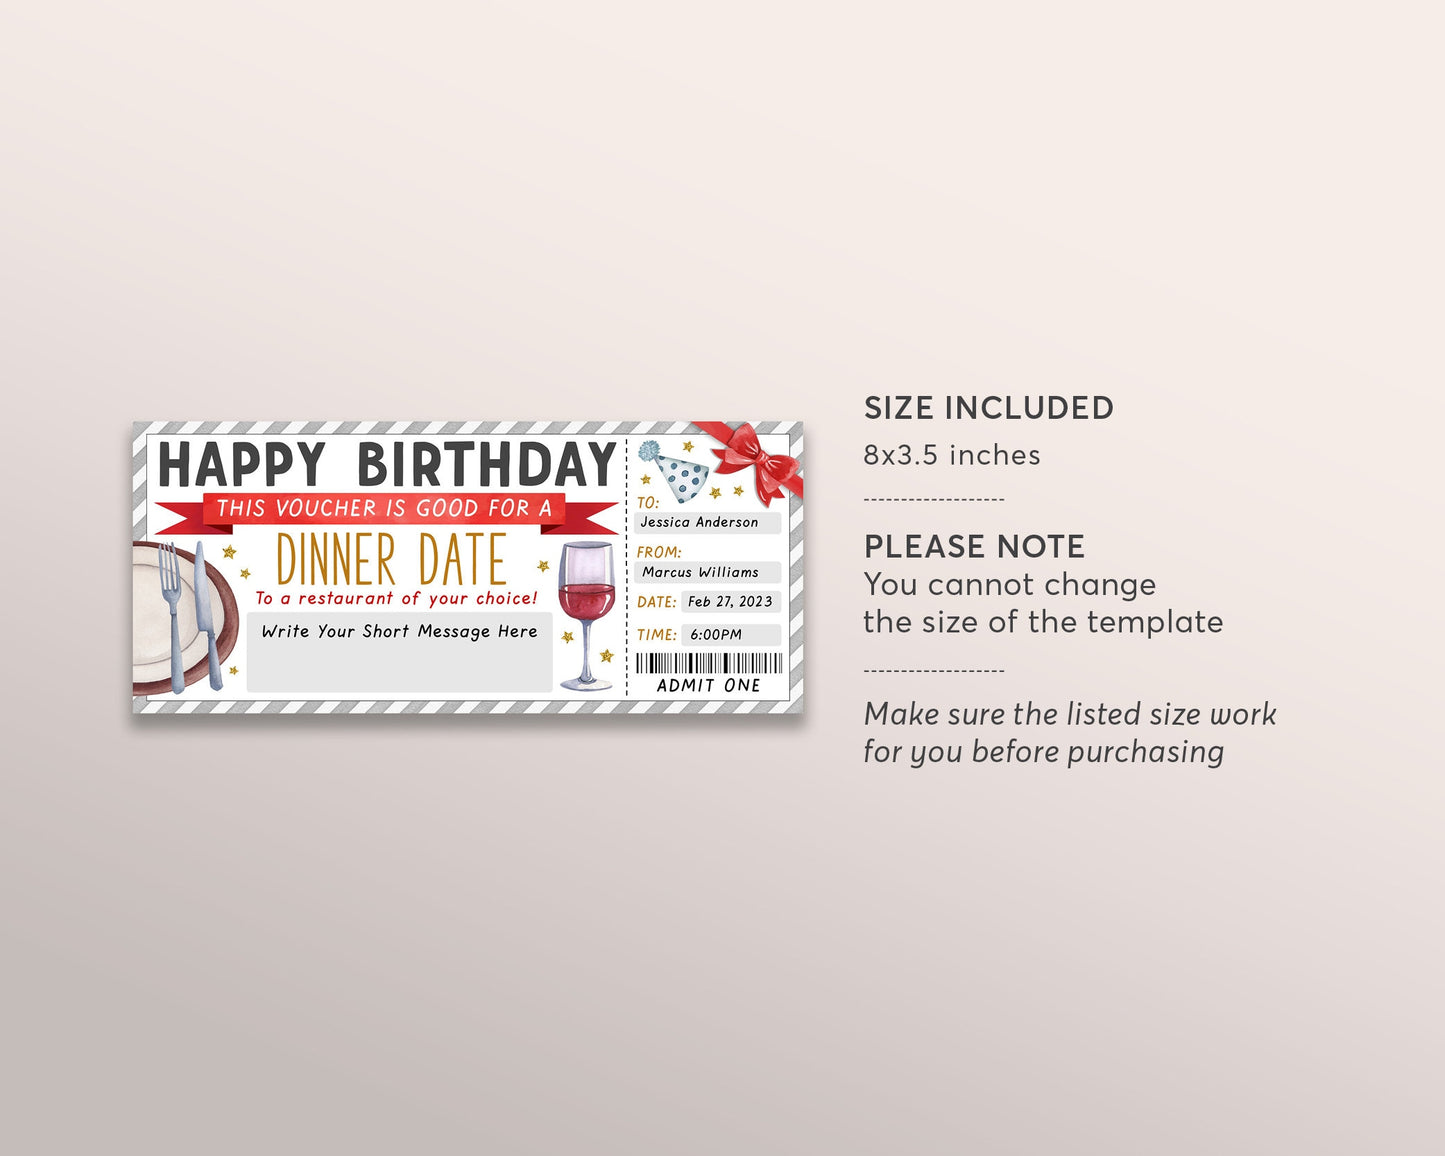 Birthday Restaurant Gift Voucher Editable Template, Surprise Dinner Date Gift Certificate Invite Printable Dining Night Out Gift Reservation